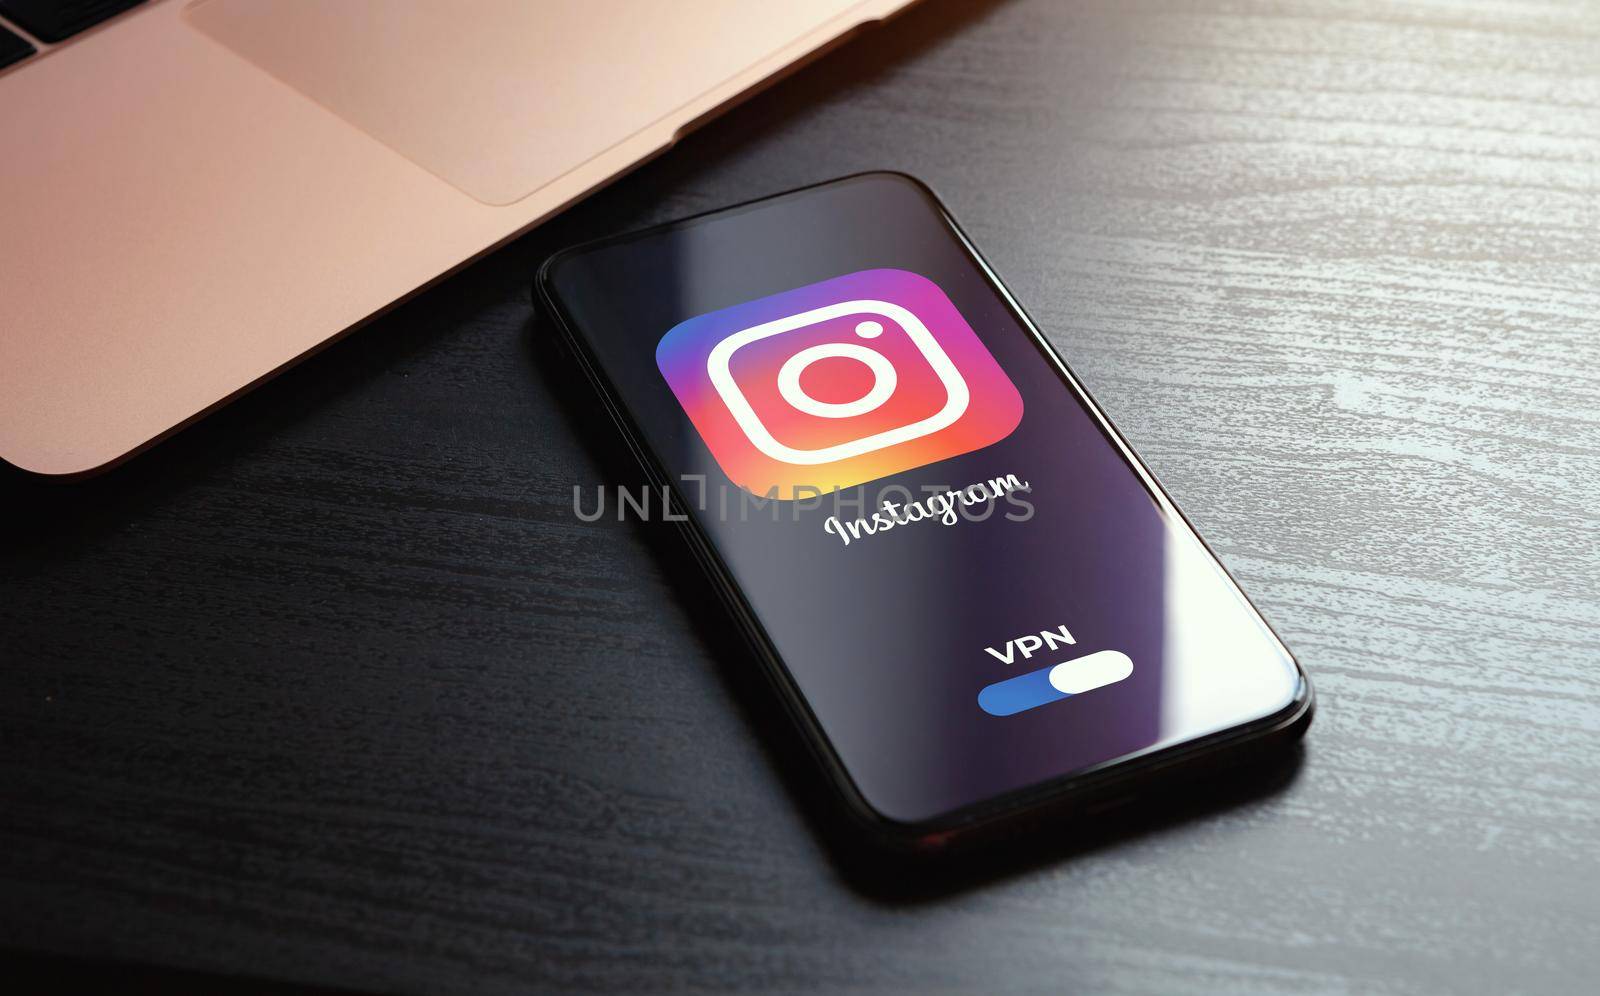 MOSCOW, RUSSIA - MAY 03, 2022: iphone lying on a wooden table, on the screen Instagram social application logo, which starts only after turning on the vpn connection. Government censorship concept by bestforbest